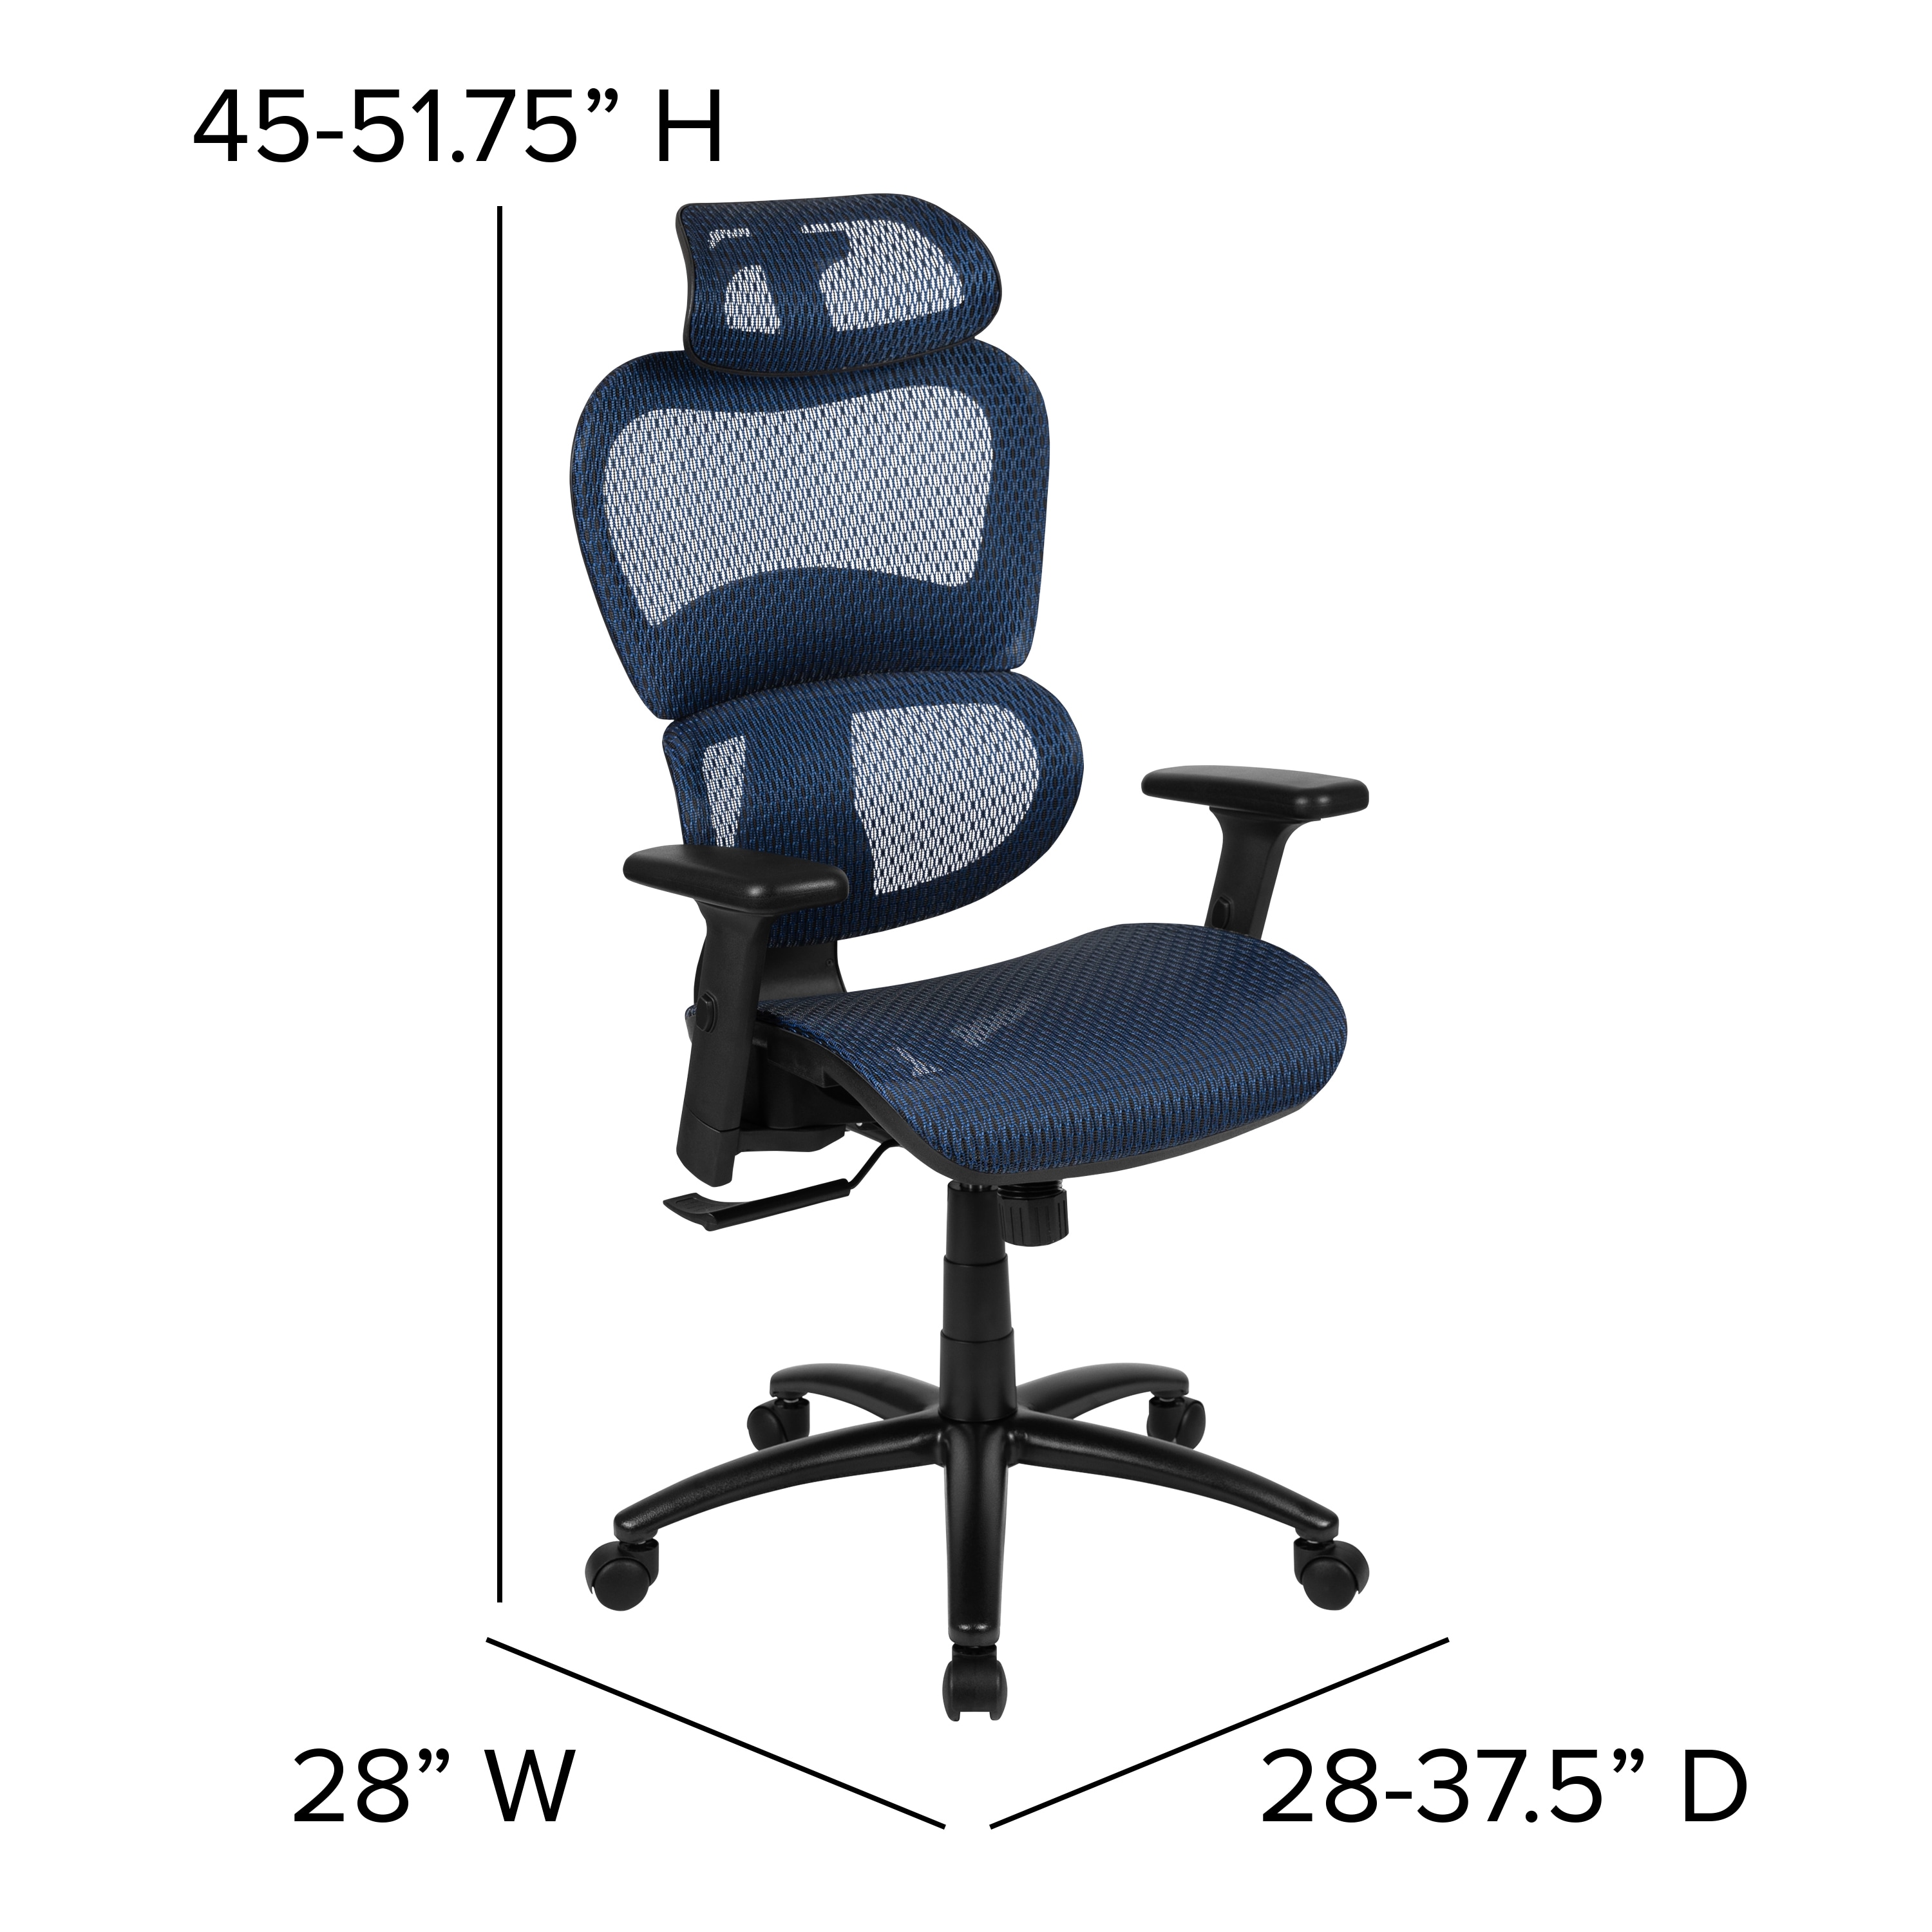 Ergonomic Adjustable Breathable Mesh Office Chair Heating Support